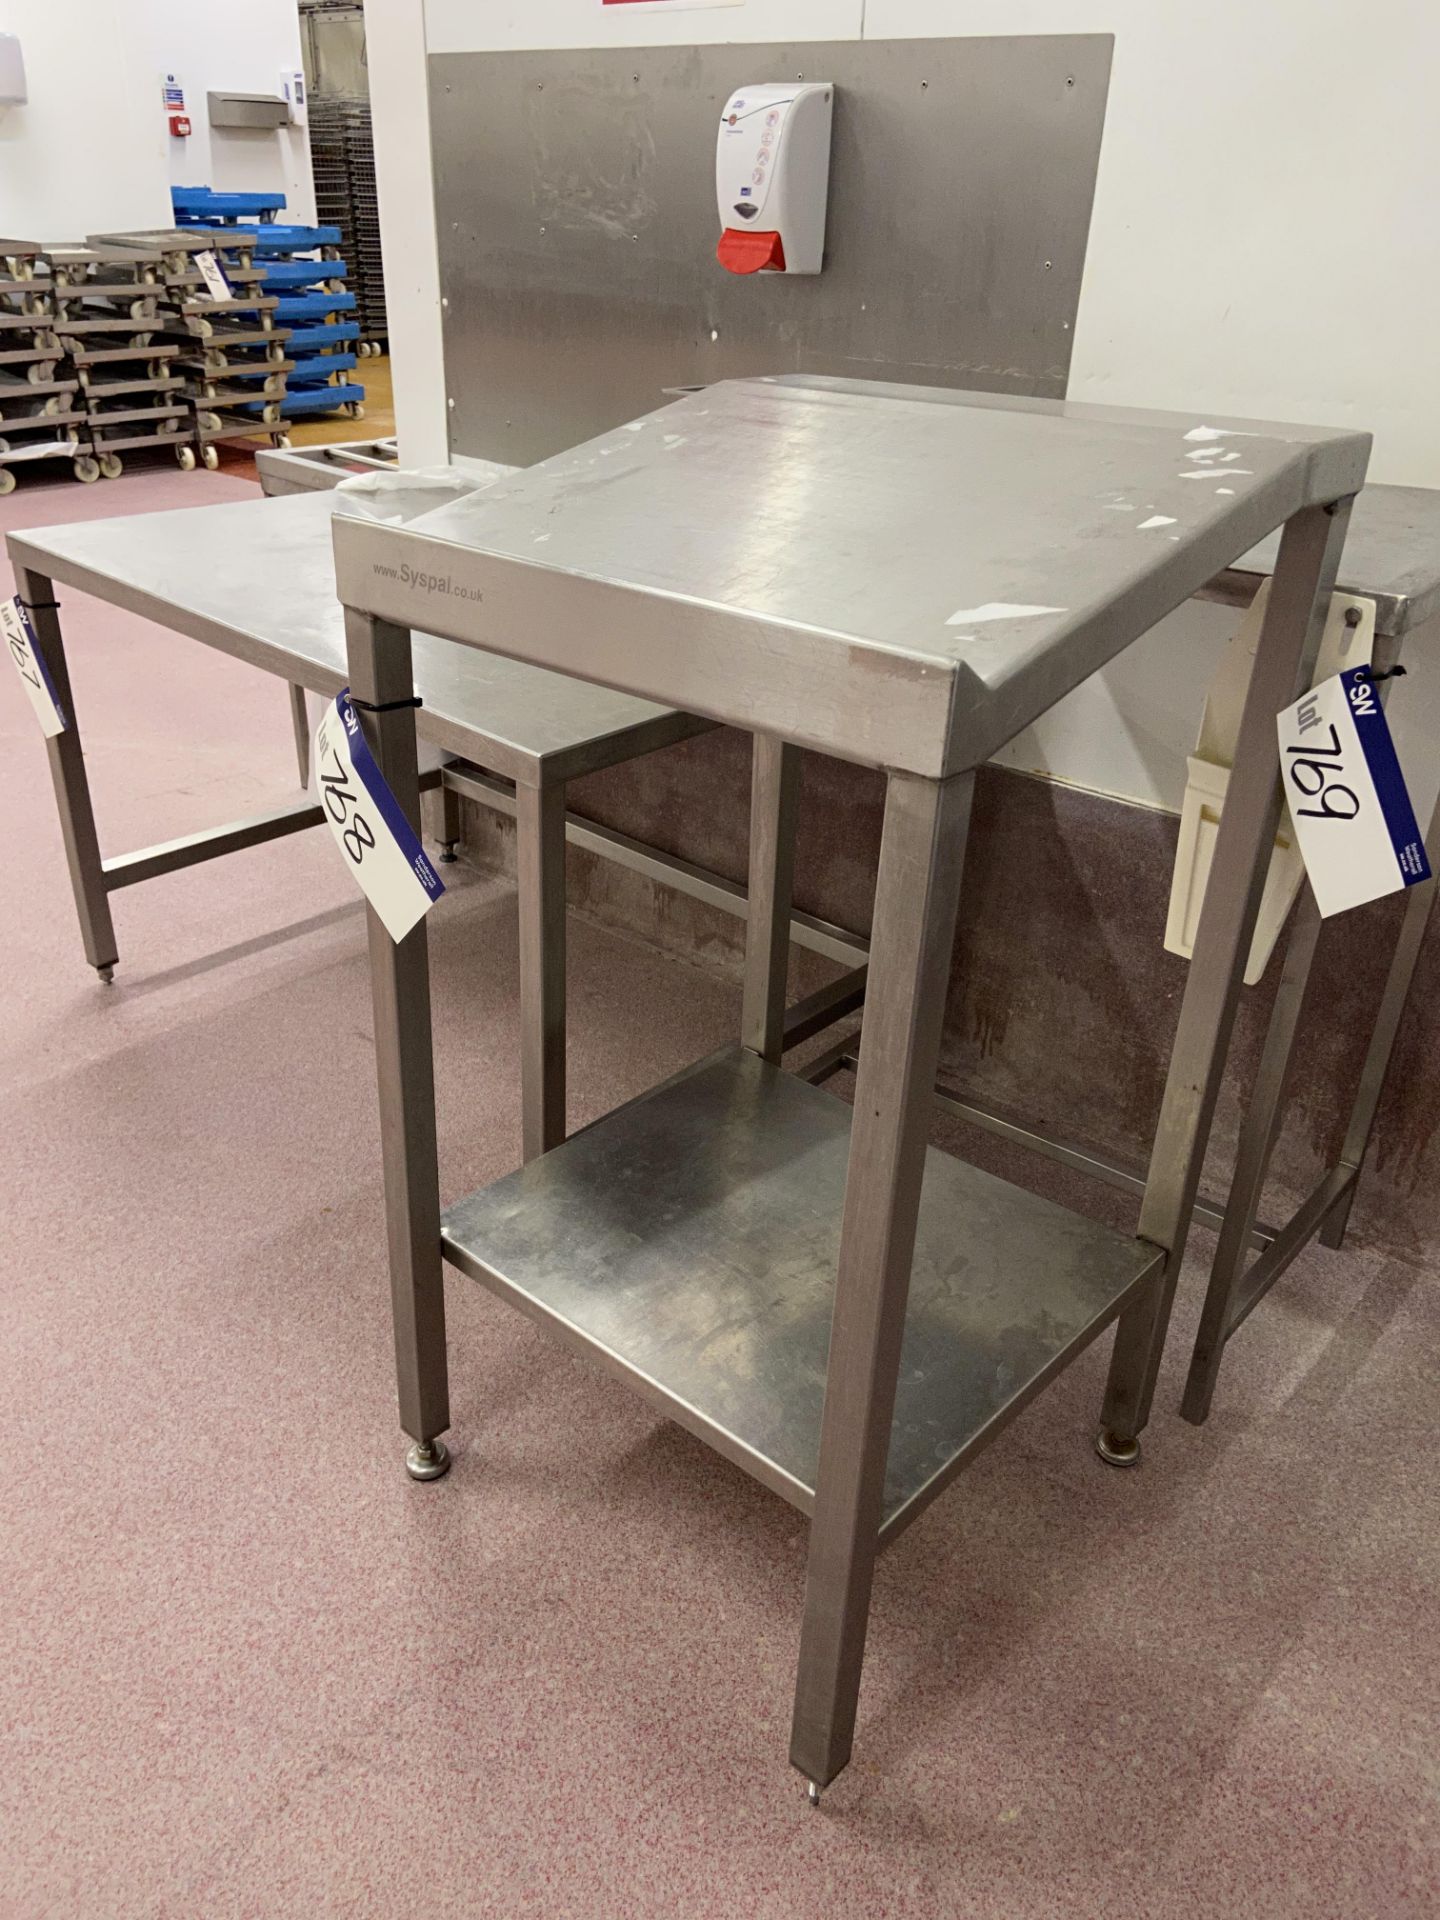 Stainless Steel Stand, approx. 600mm x 600mmPlease read the following important notes:- ***